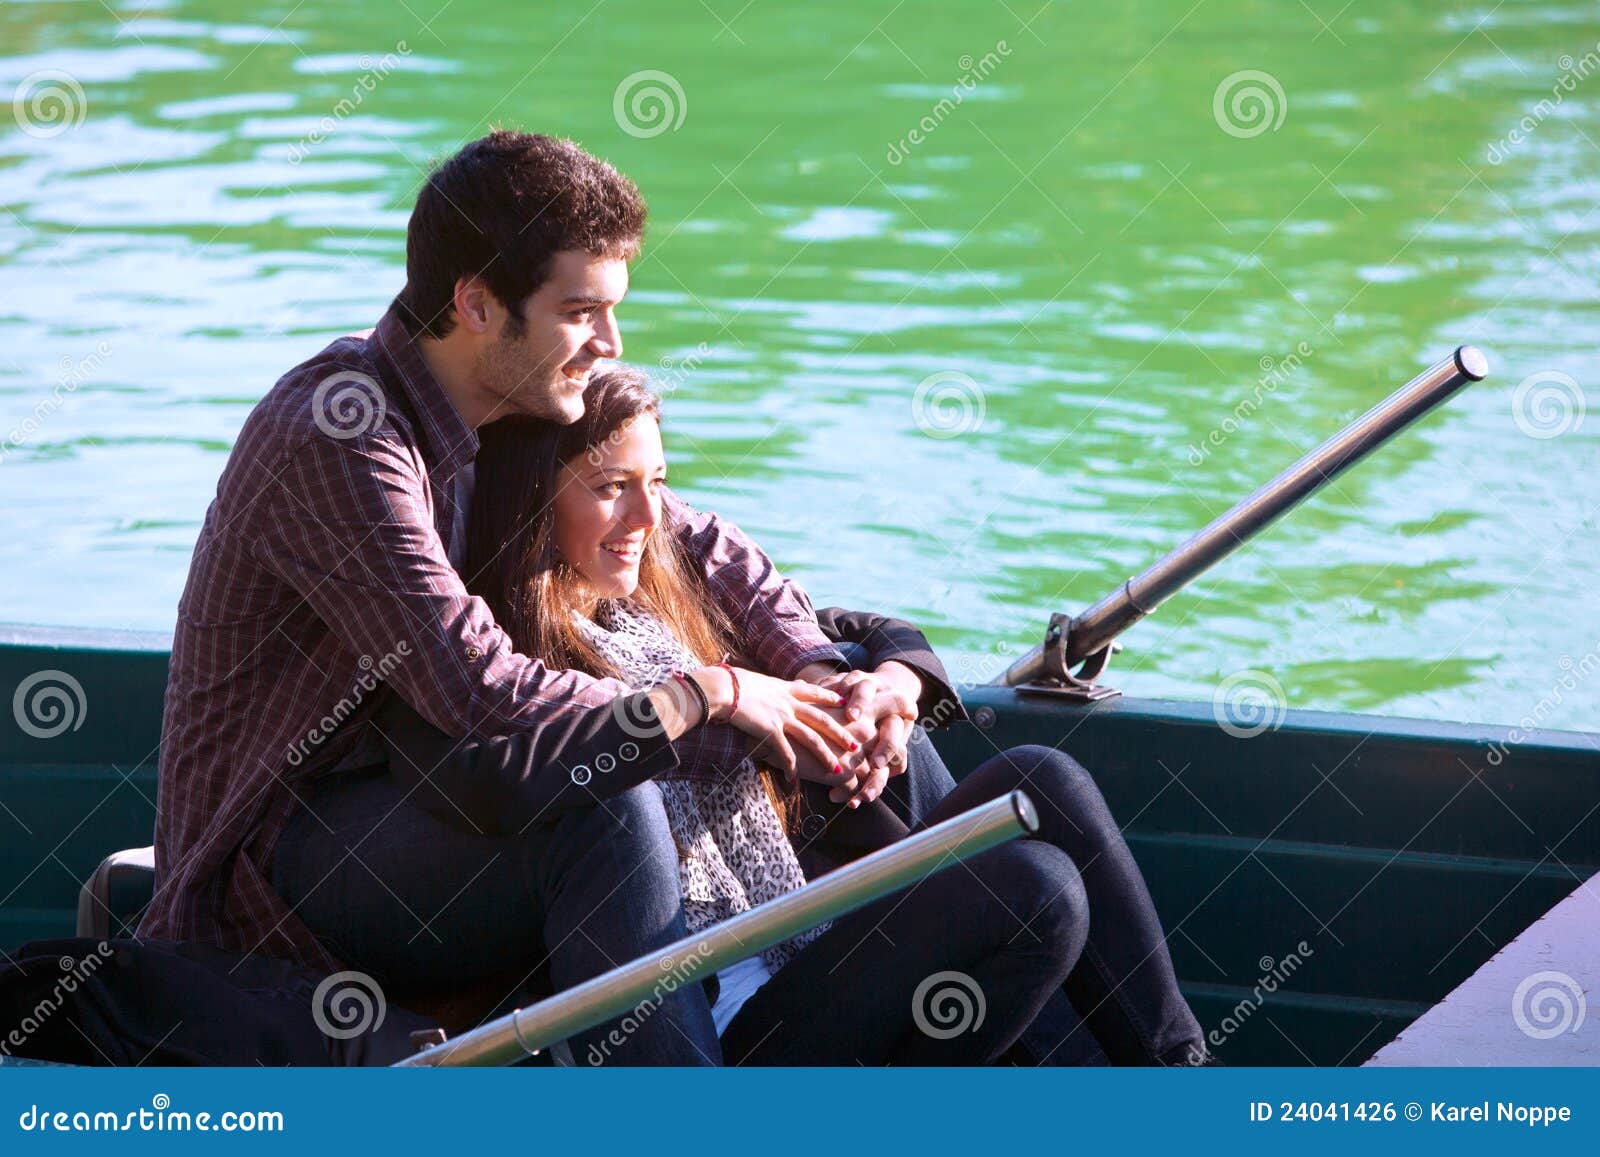 Close Up Of Couple On Small Boat Stock Photo - Image of ...